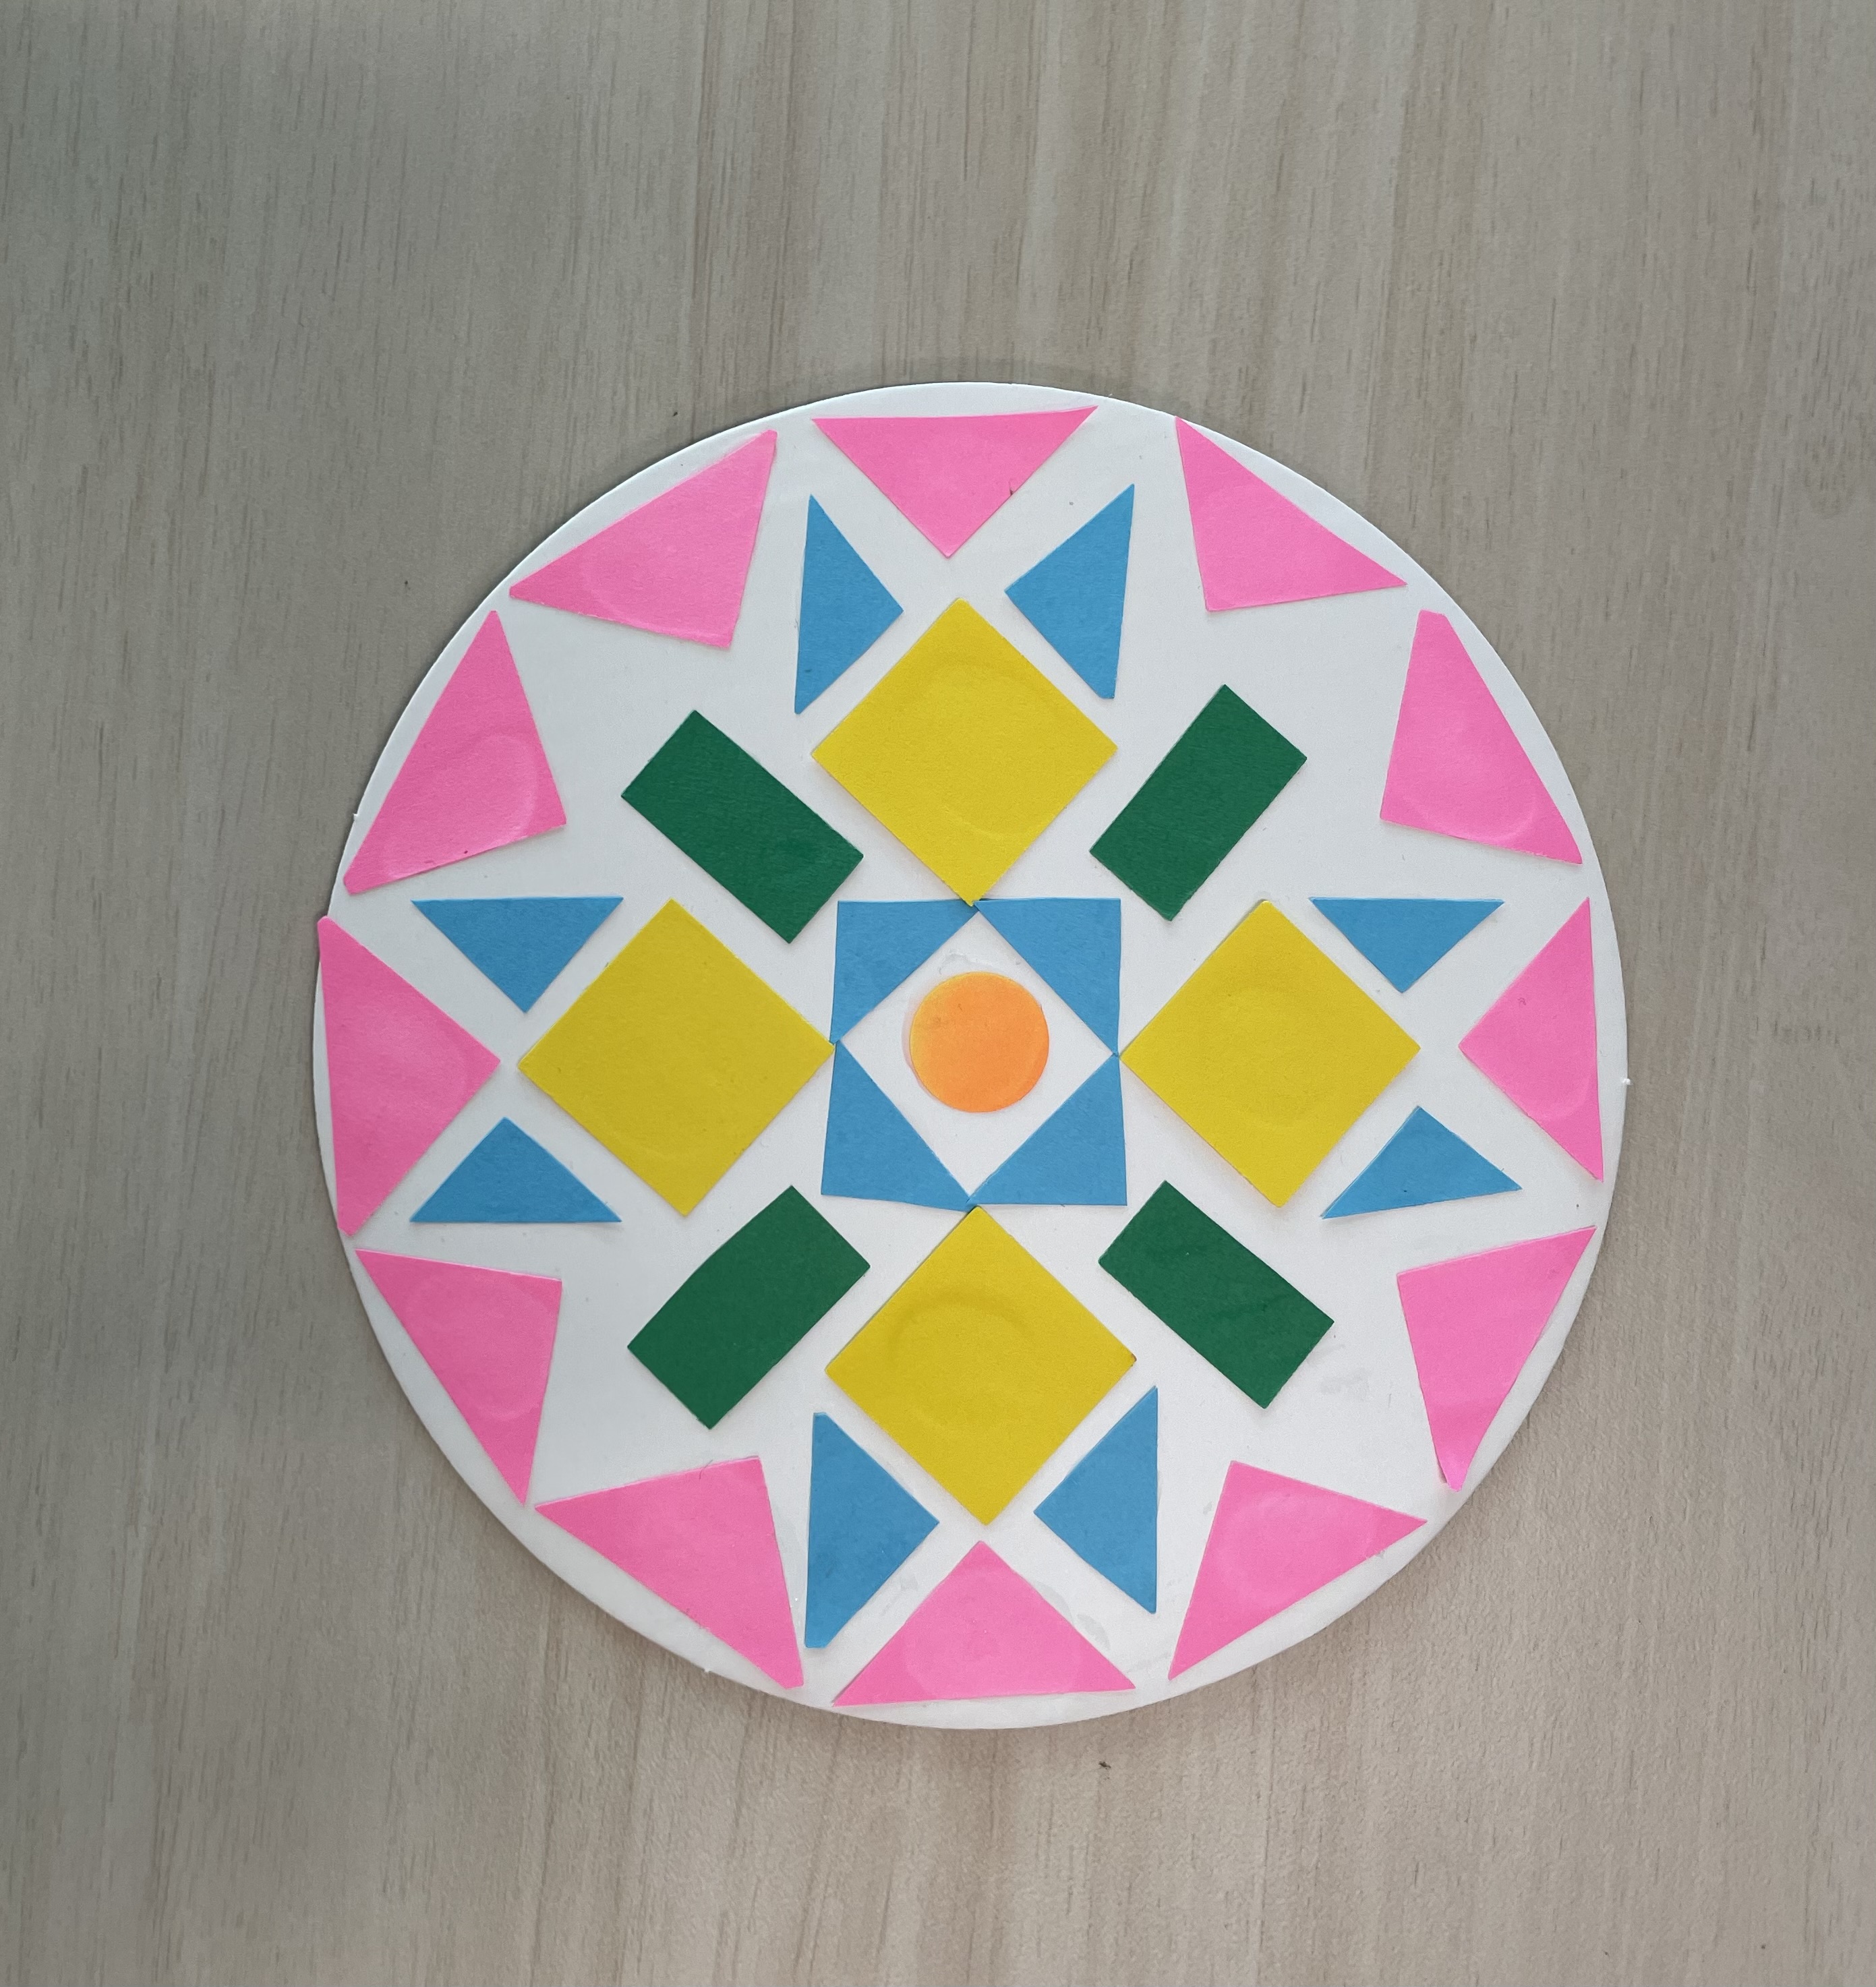 White paper circle with a symmetrical design of colorful triangle and squares.